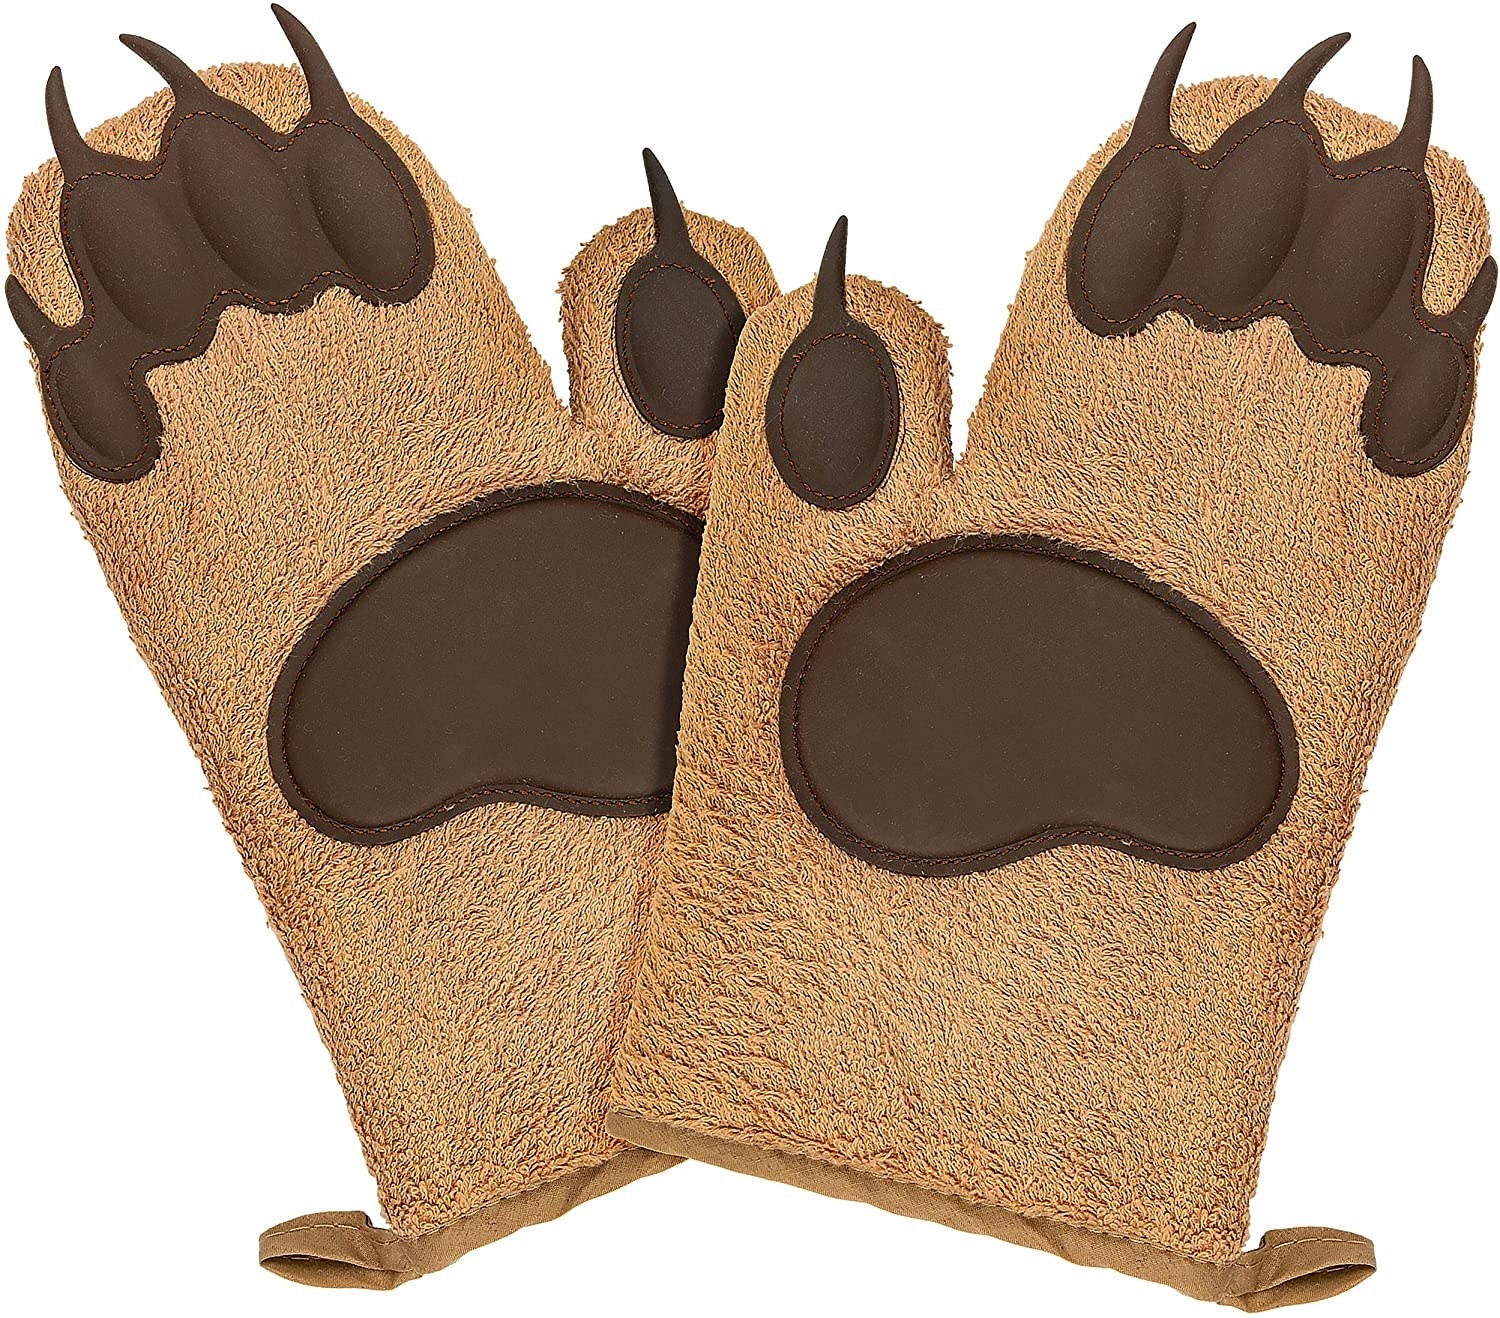 Mittens That Look Like Bear Claws